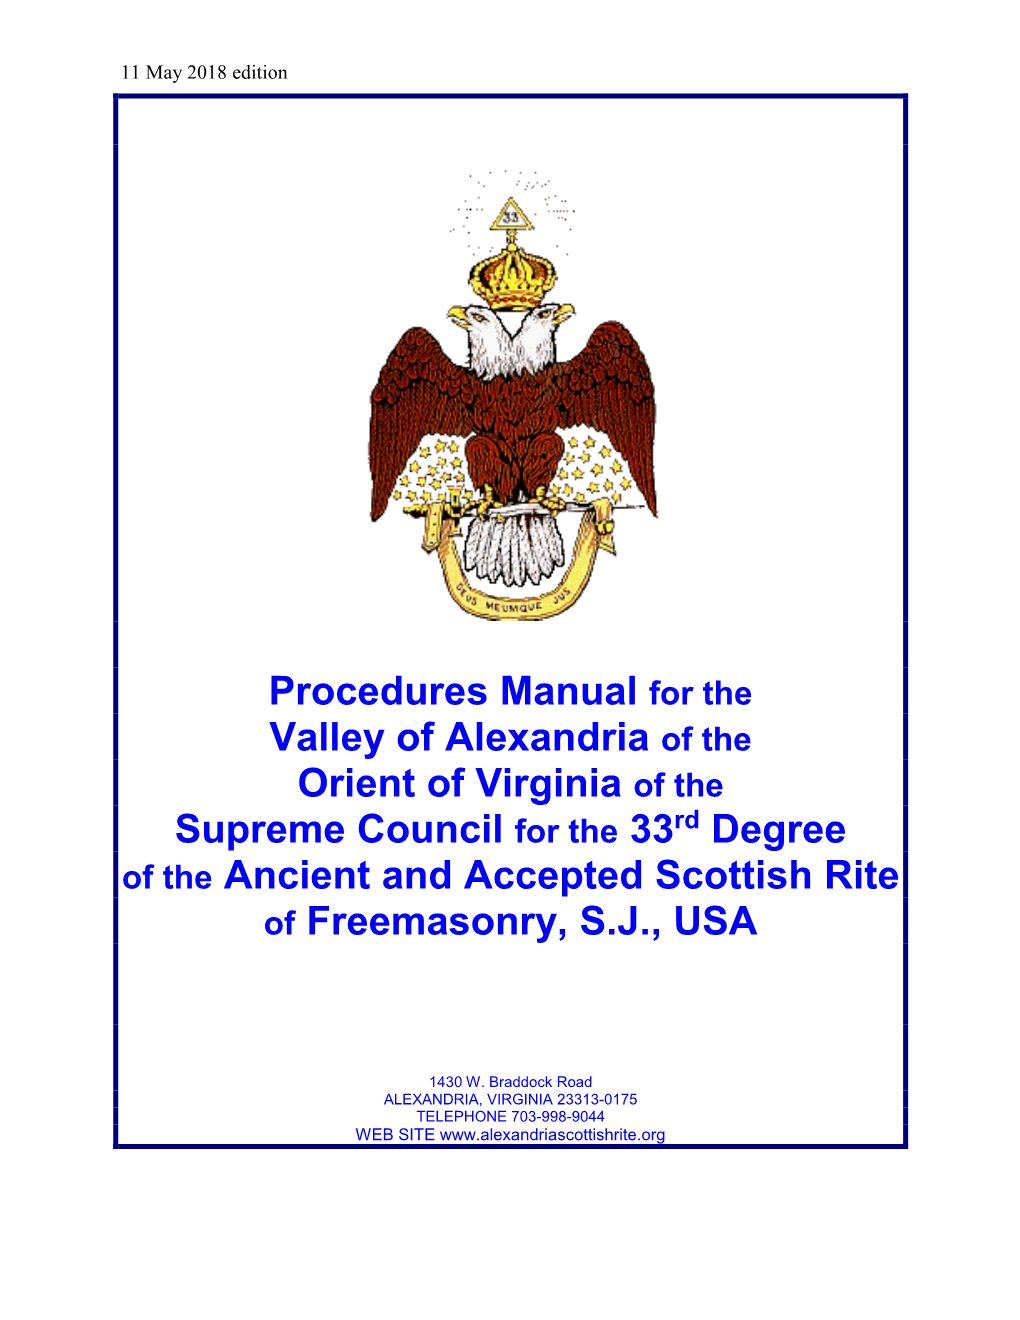 Procedures Manual for the Valley of Alexandria of the Orient of Virginia